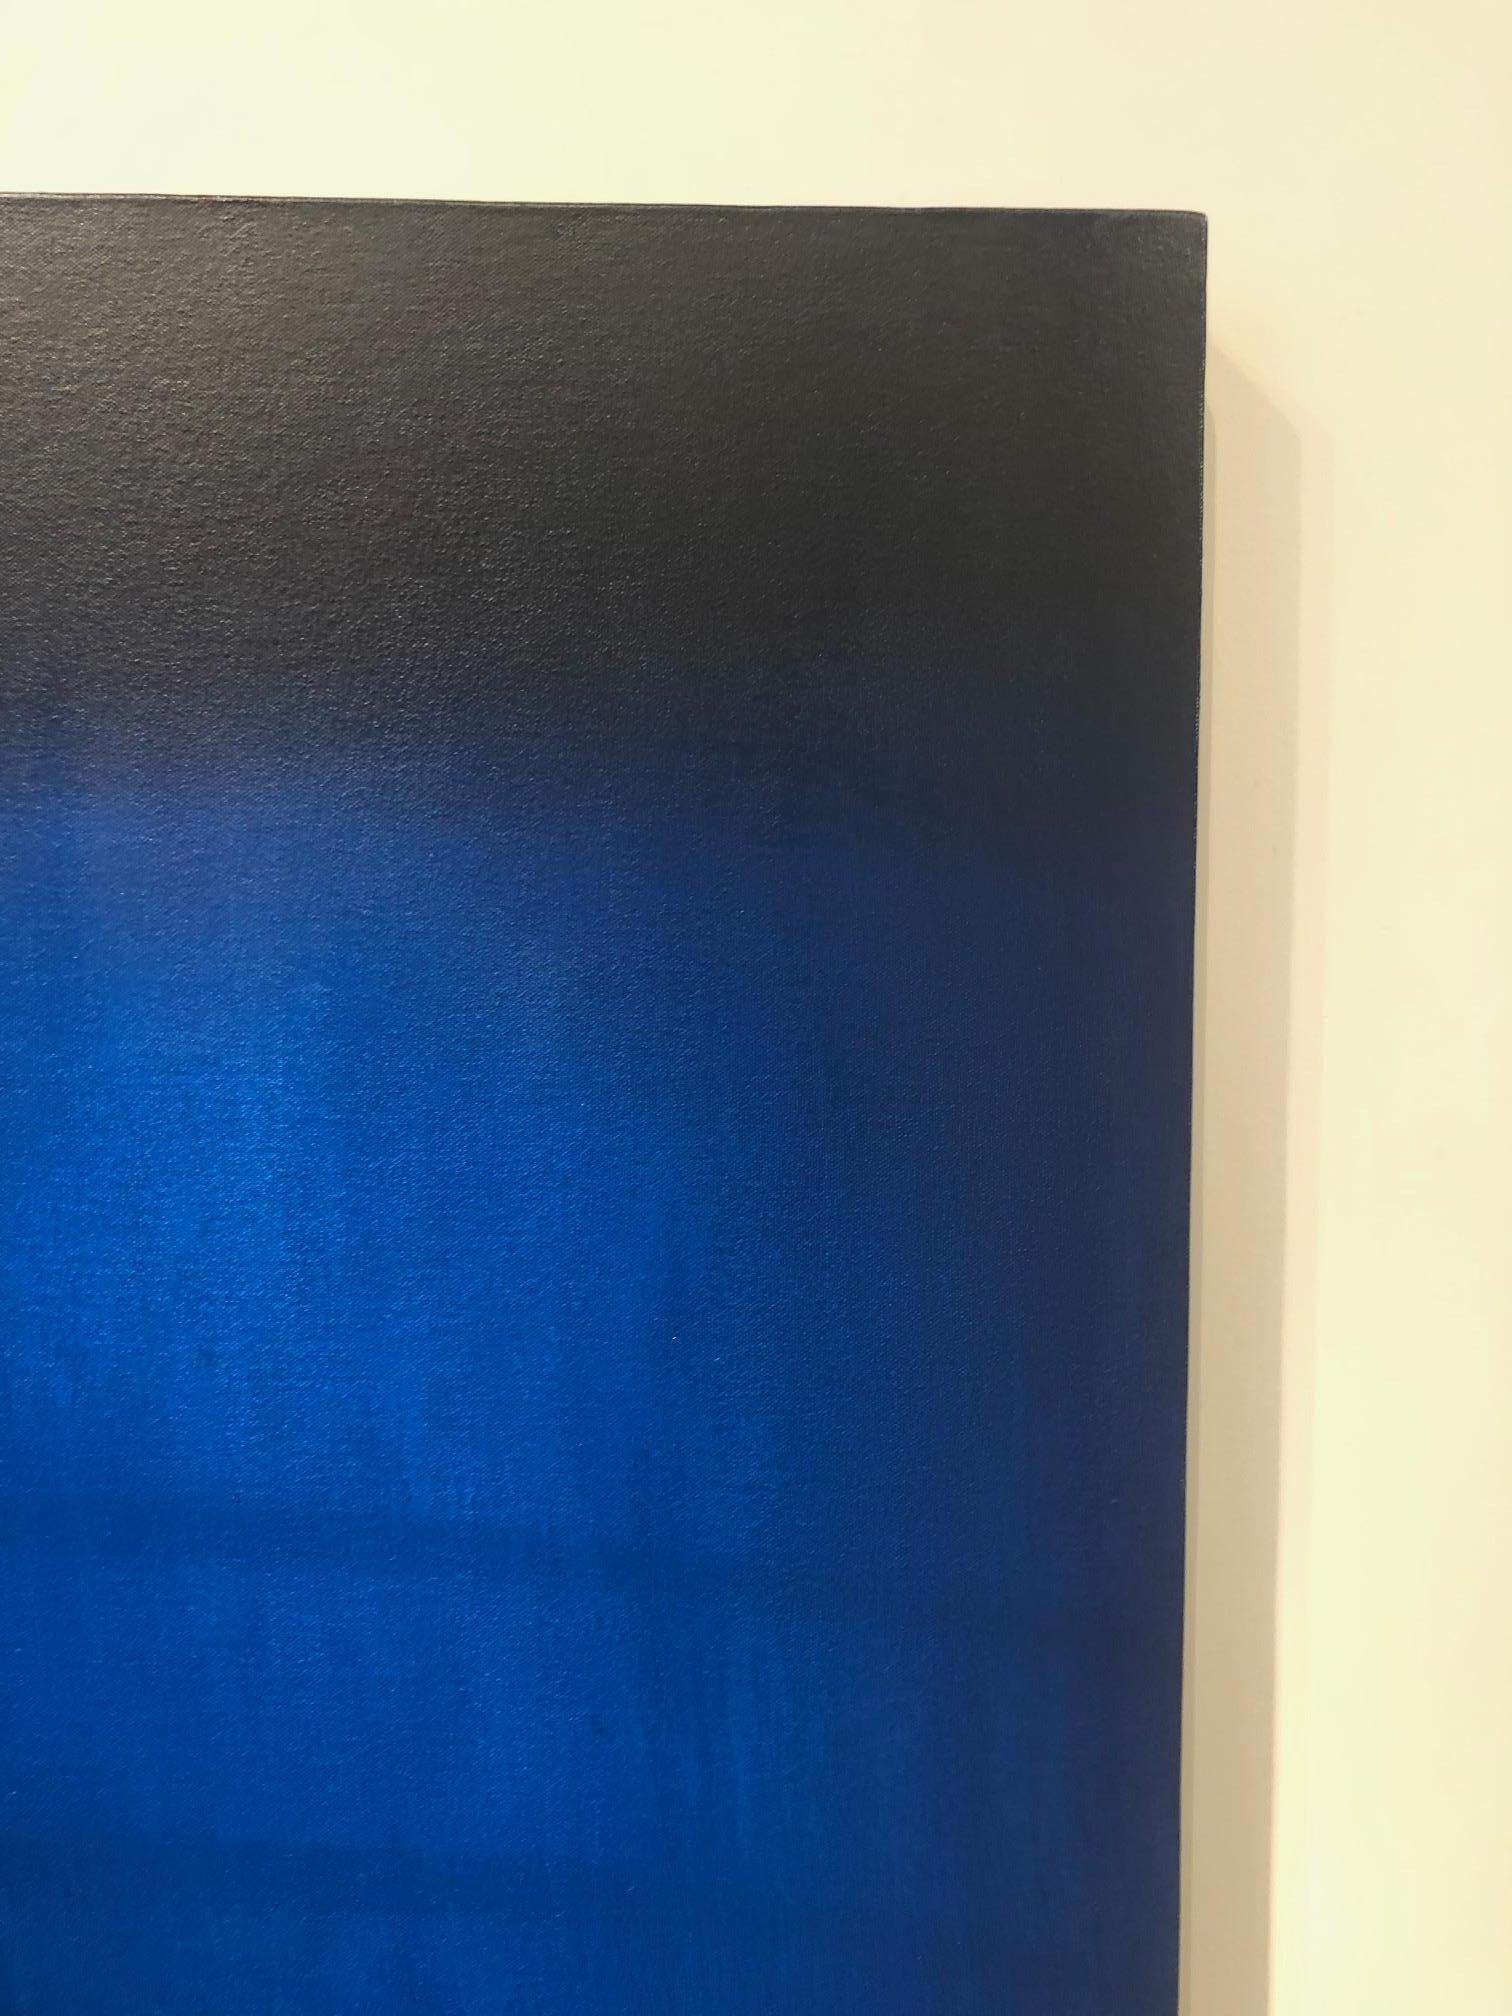 Blue is the focus of this abstract oil on canvas painting by artist Anne Subercaseaux, whose gleaming oil paintings realistically bridge urban with rural in the form of representational fragmented depictions of contemporary architecture, including